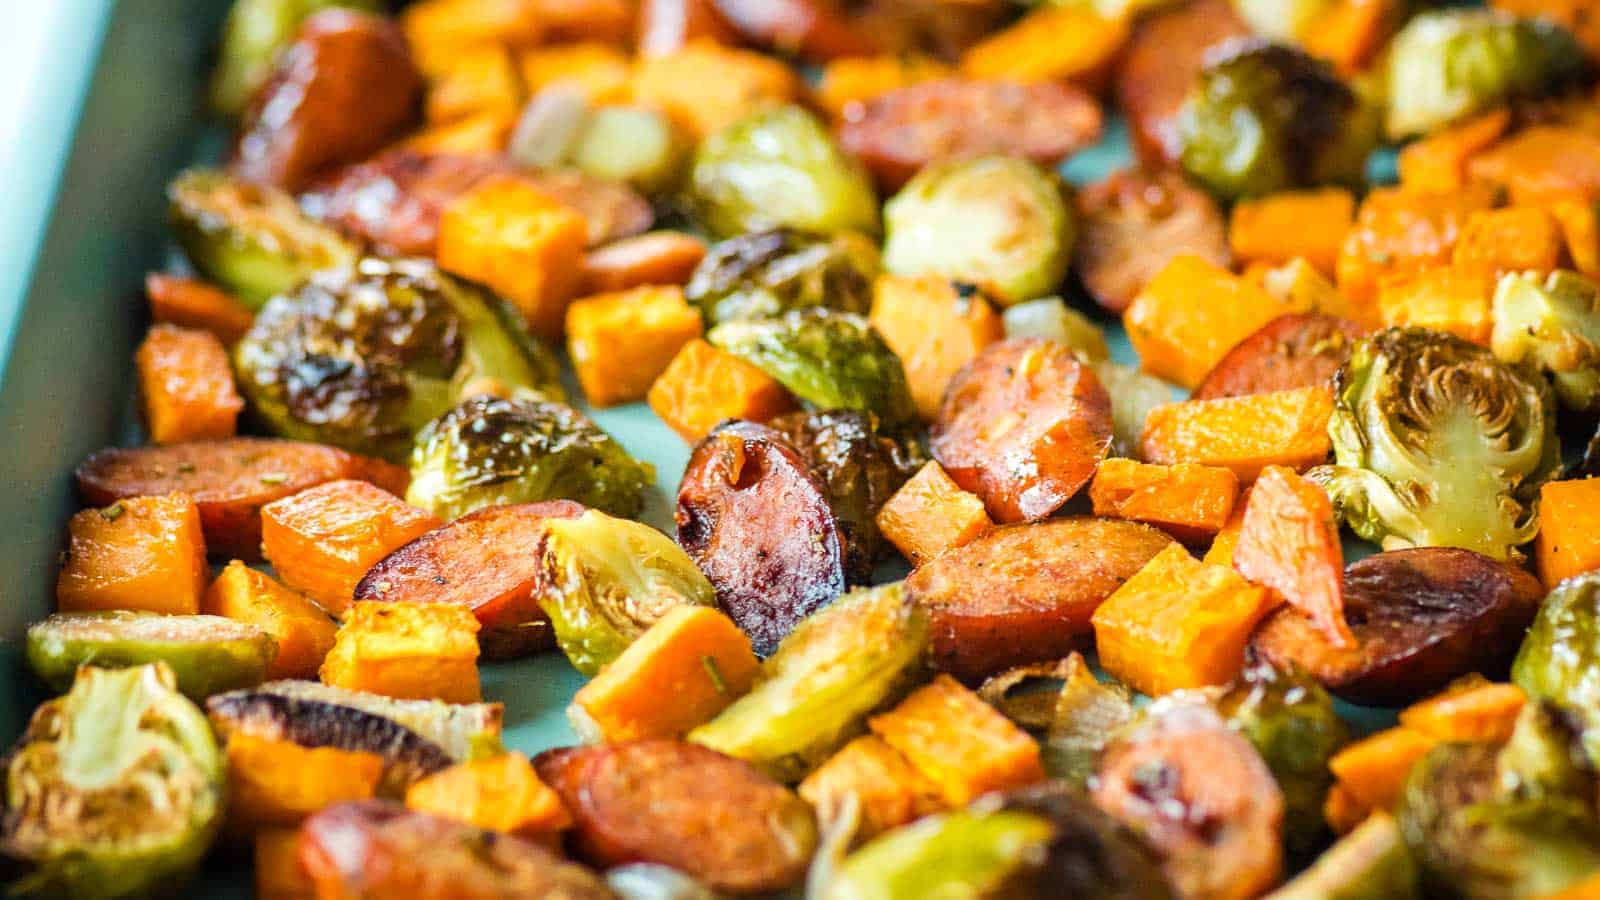 Roasted chicken apple sausage, sweet potatoes, Brussels sprouts and shallots on a sheet tray.